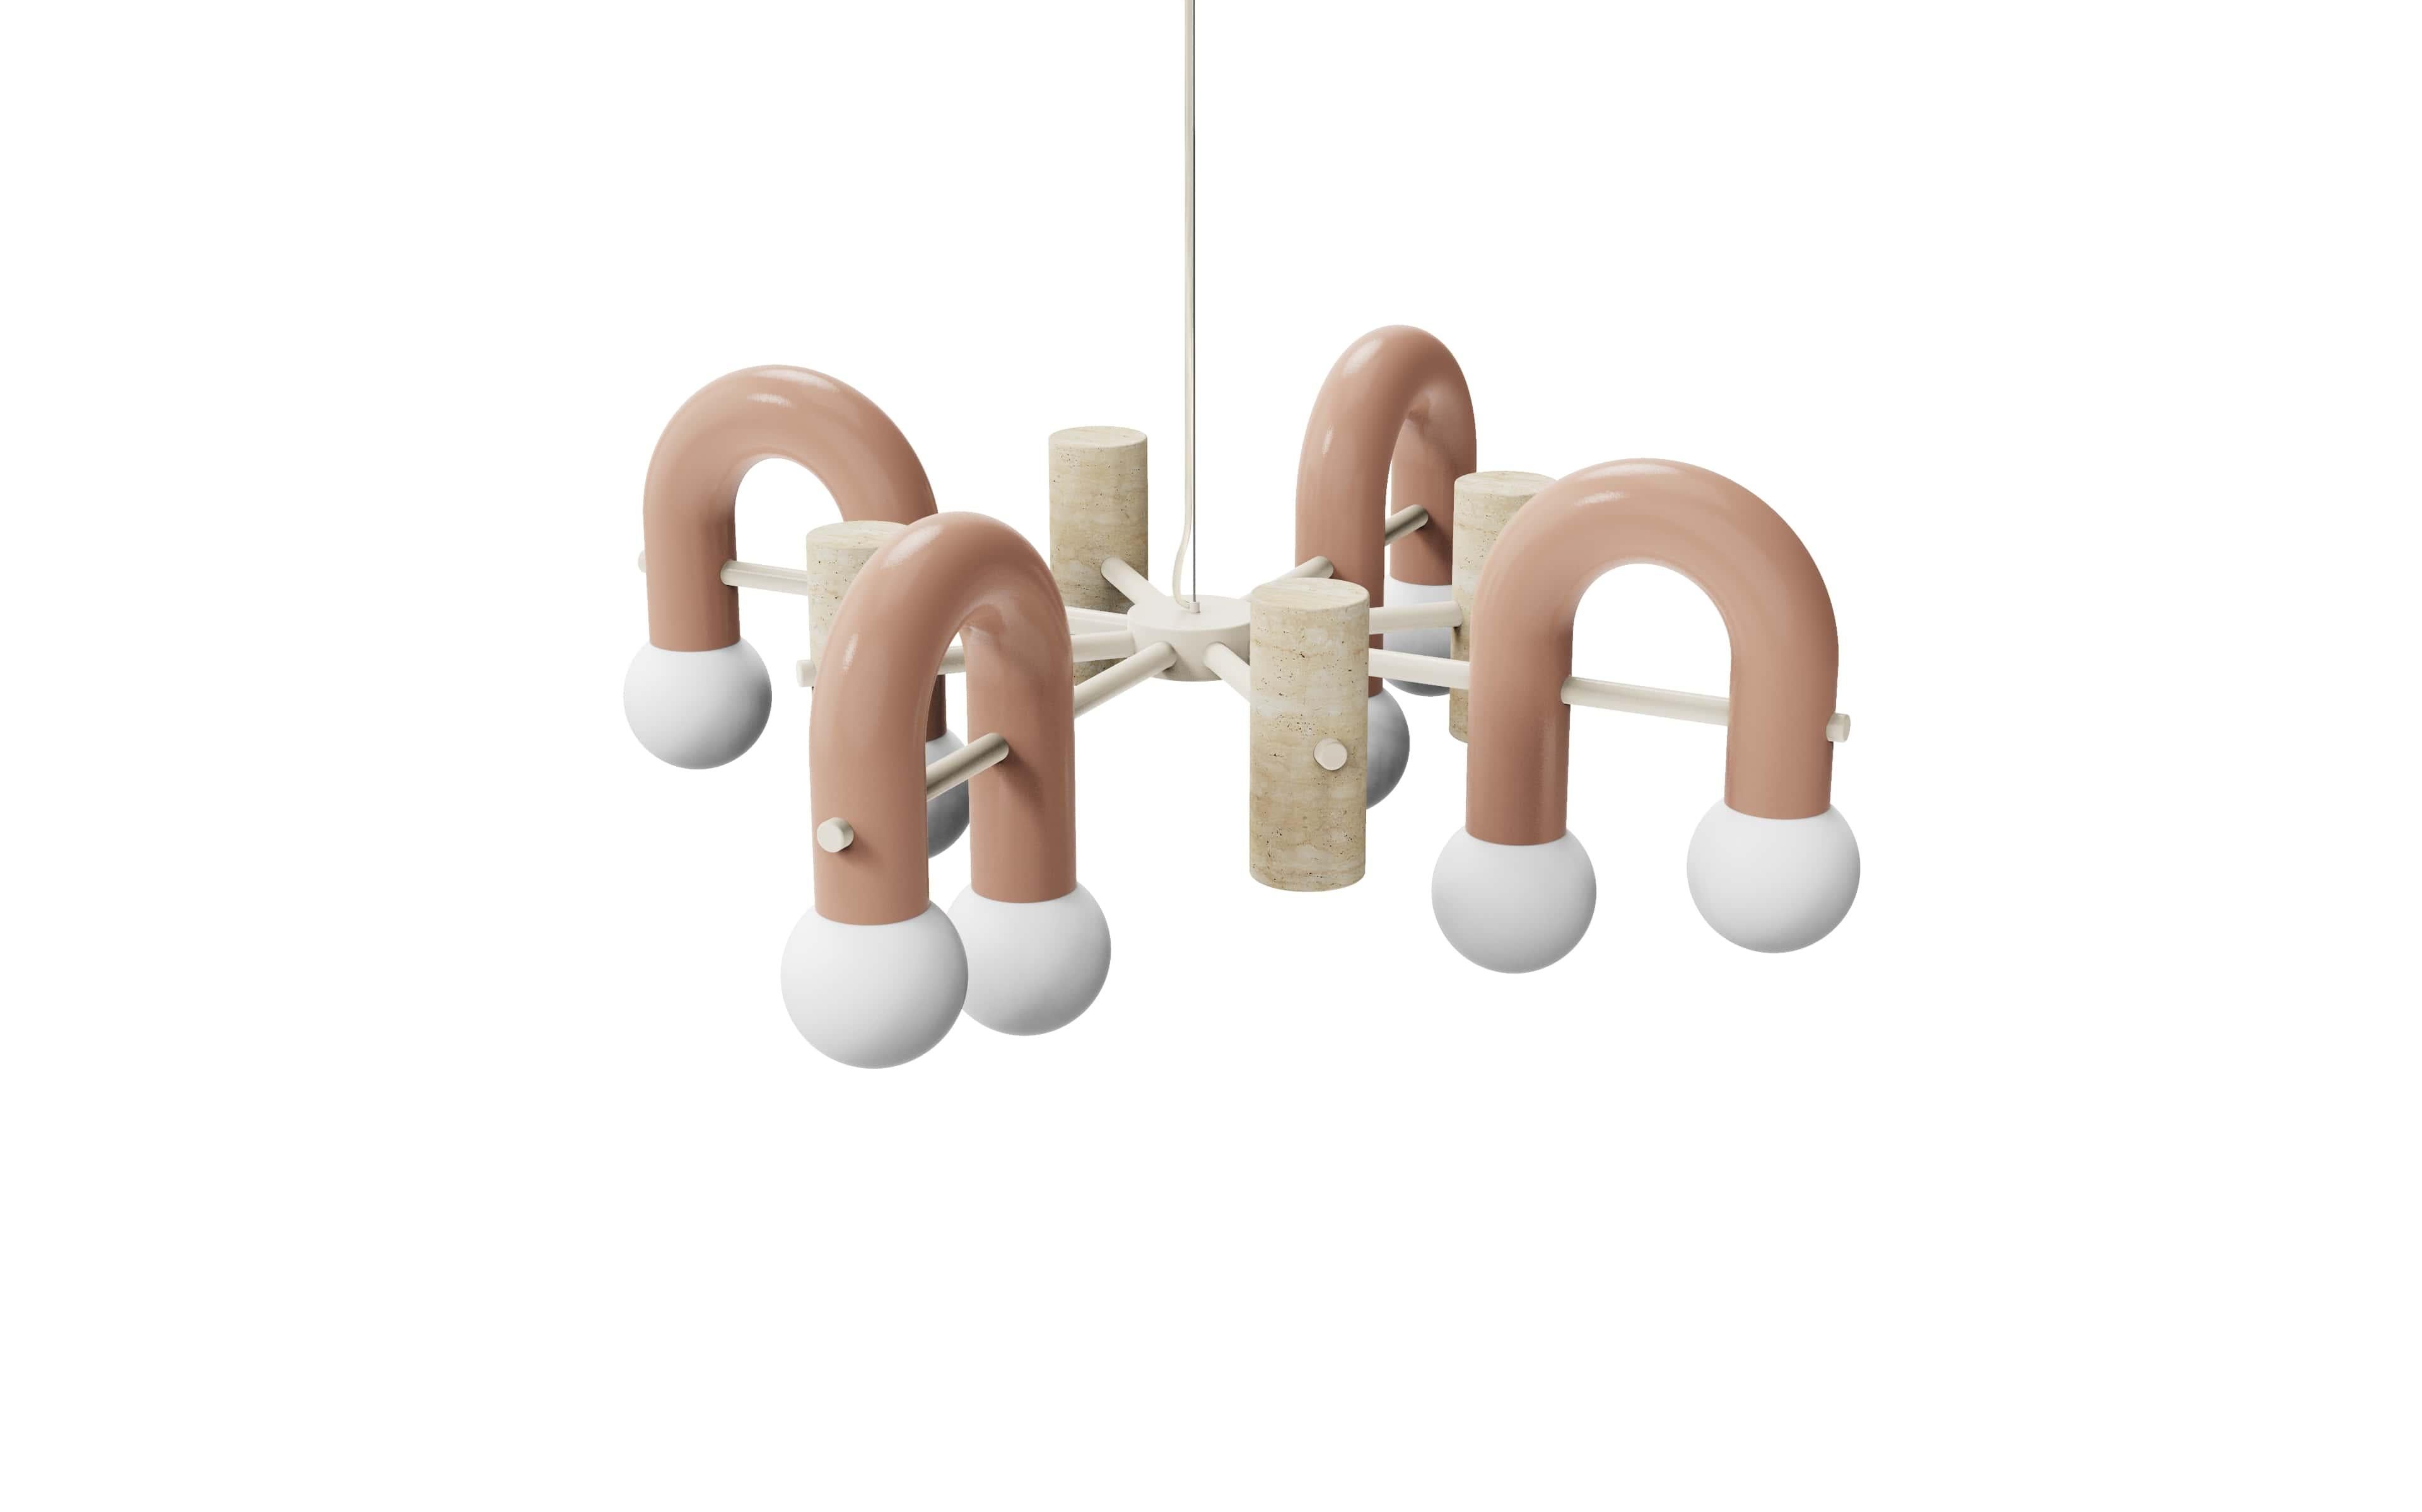 Ivory Pyppe suspension lamp 100 by Utu Lamps
Dimensions: 36 x 100 x 100 cm
Materials: Lacquered metal, brass, nickel/copper, travertine

All our lamps can be wired according to each country. If sold to the USA it will be wired for the USA for